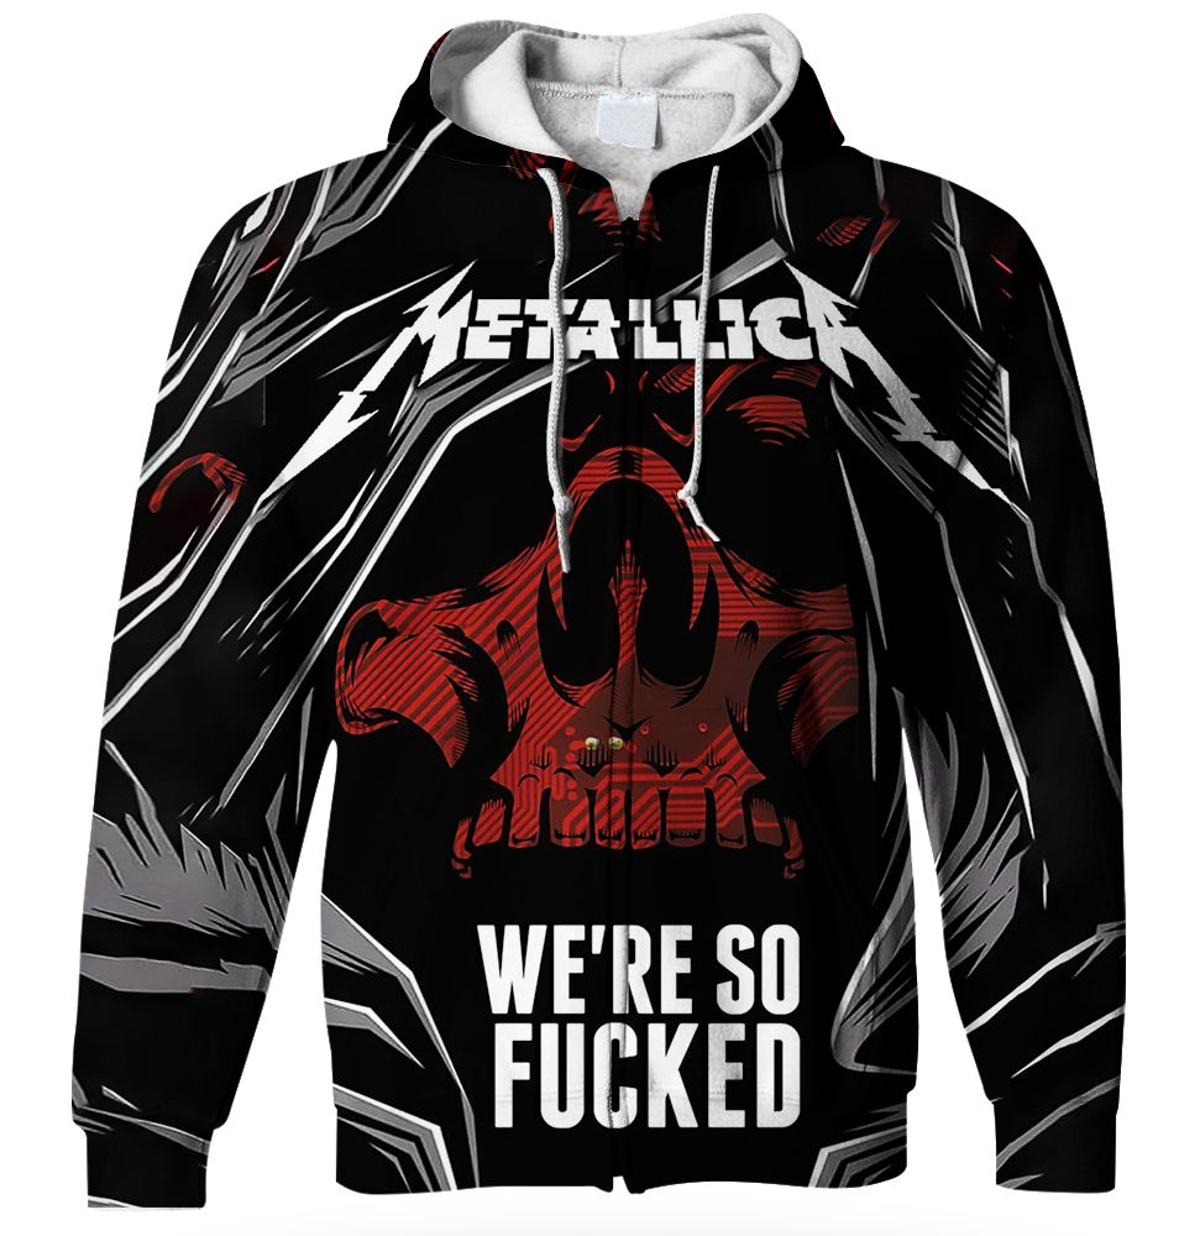 Metallica I’m Madly Anger With You Zip Hoodie Grey